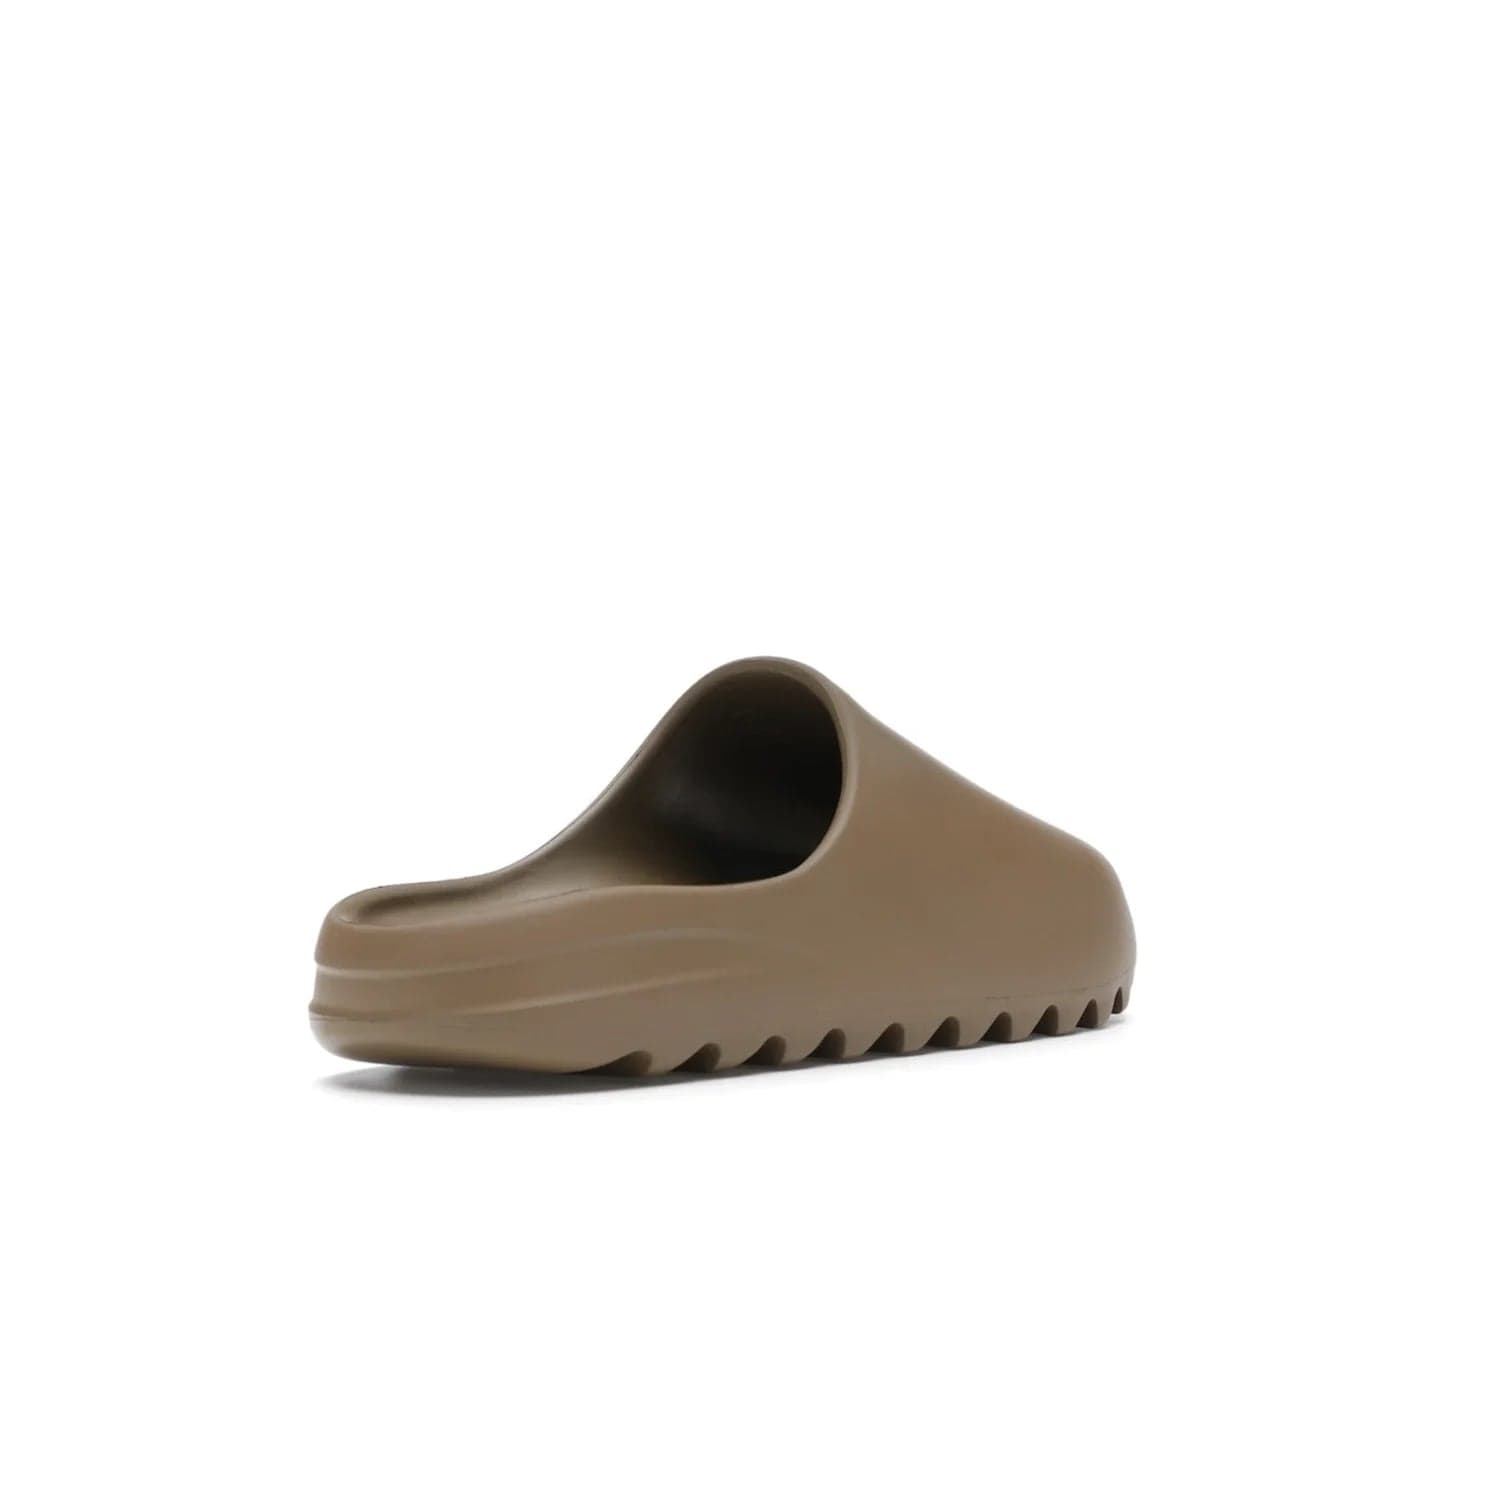 adidas Yeezy Slide Core - Image 32 - Only at www.BallersClubKickz.com - Experience lightweight comfort and cushioning with the adidas Yeezy Slide Core. Features EVA foam upper, soft footbed & grooved outsole for optimal traction & support. The Core/Core/Core colorway released April 2021.